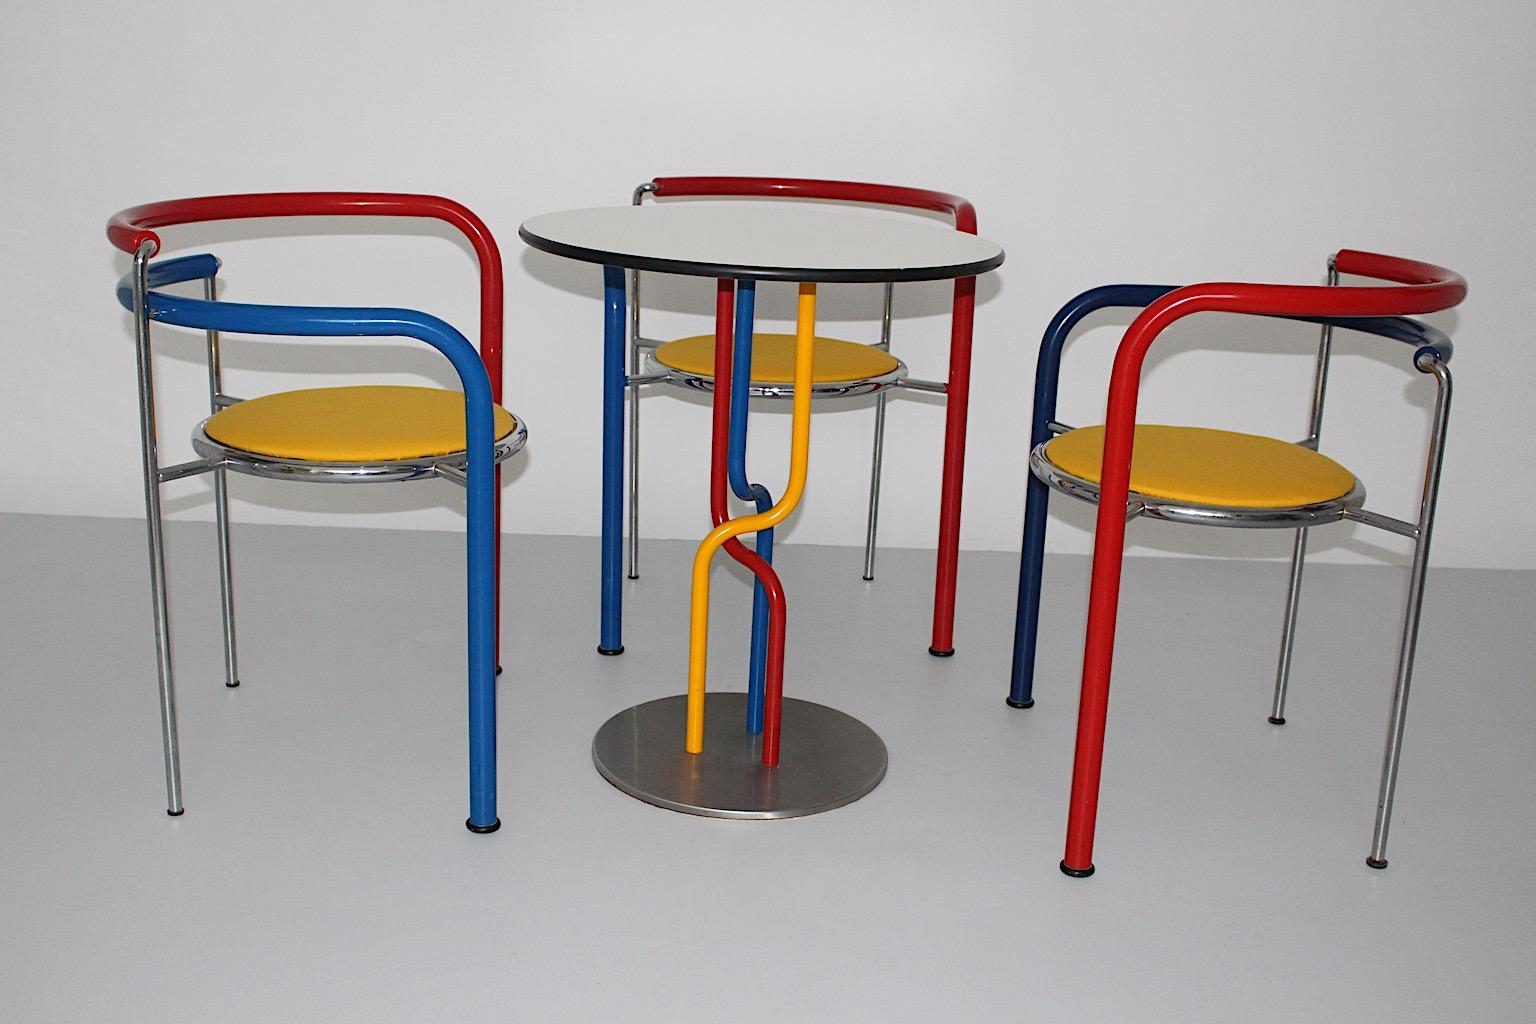 Pop Art  multicolored vintage three ( 3 )  dining chairs with one ( 1 ) table  model Dark Horse designed by Rud Thygesen & Johnny Sorensen for Botium, Denmark, circa 1989.
A stunning set with multicolored chairs and table from the wild decade 1980s.